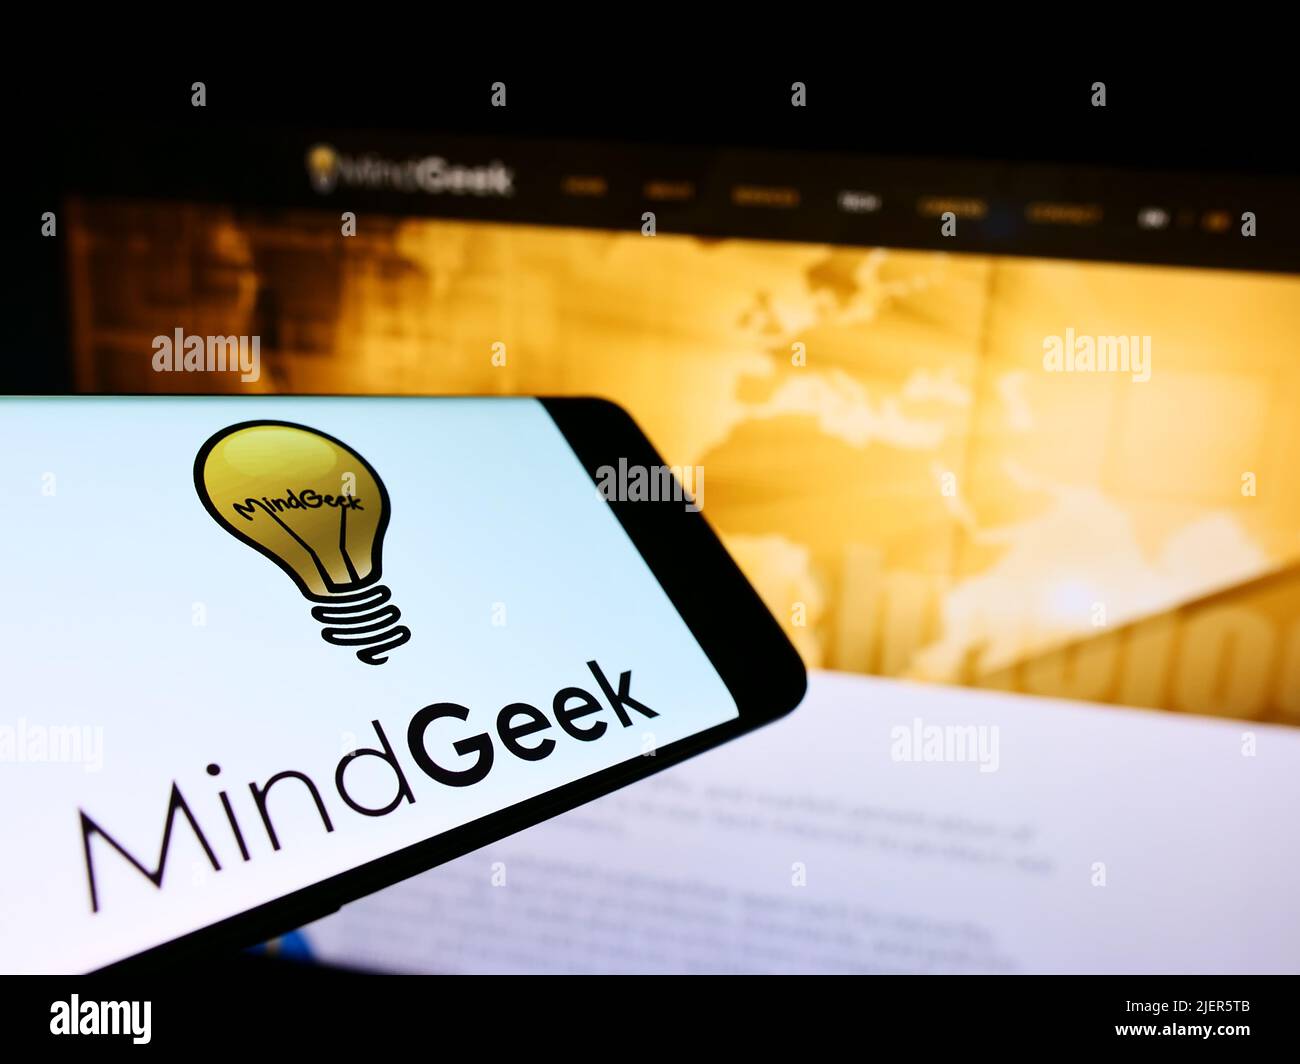 Mobile phone with logo of pornography company MindGeek SARL on screen in front of business website. Focus on center-right of phone display. Stock Photo